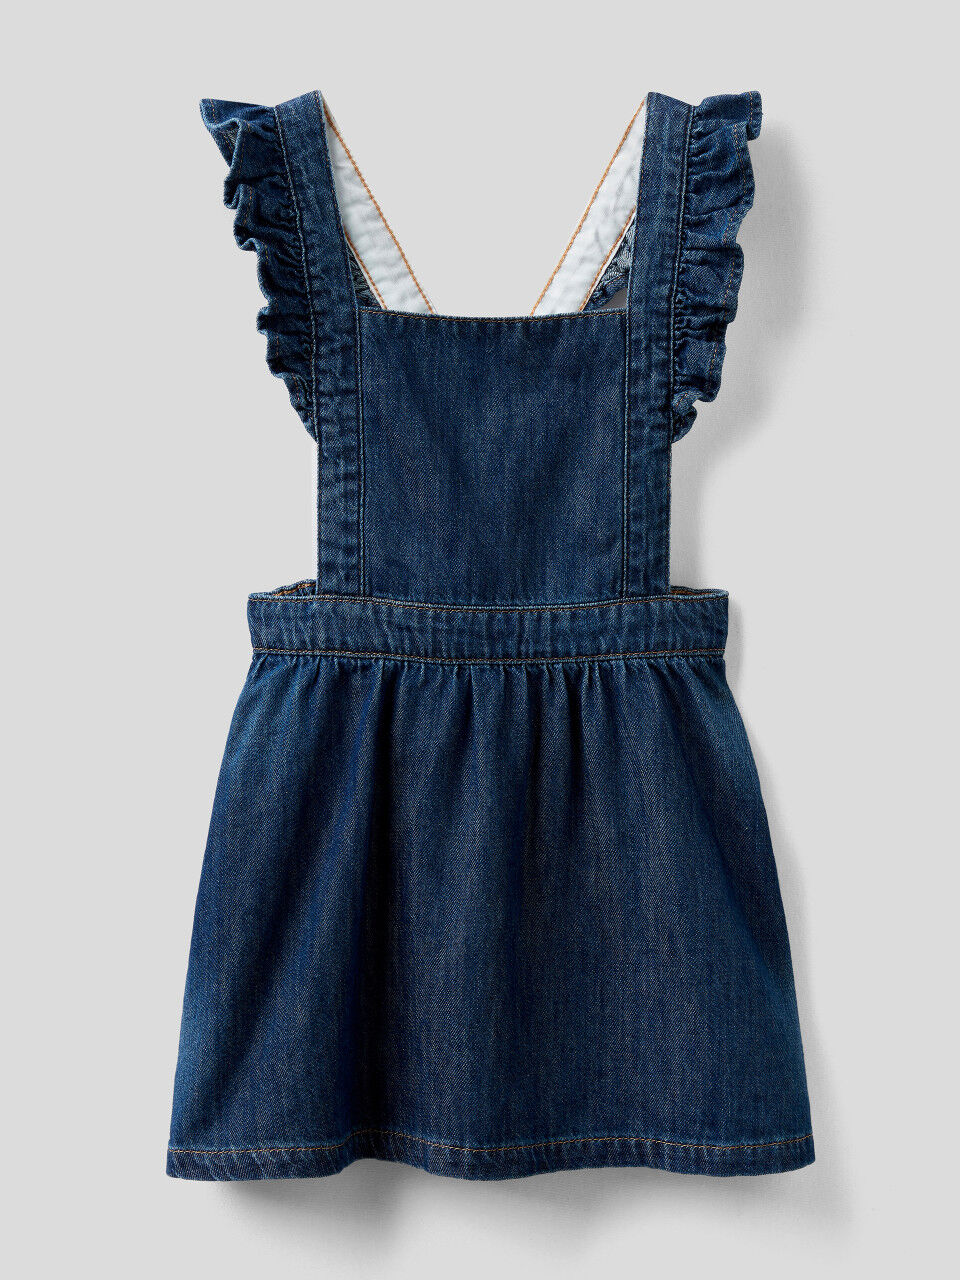 WOMEN FASHION Baby Jumpsuits & Dungarees Jean Dungaree Zara dungaree discount 82% Blue XS 